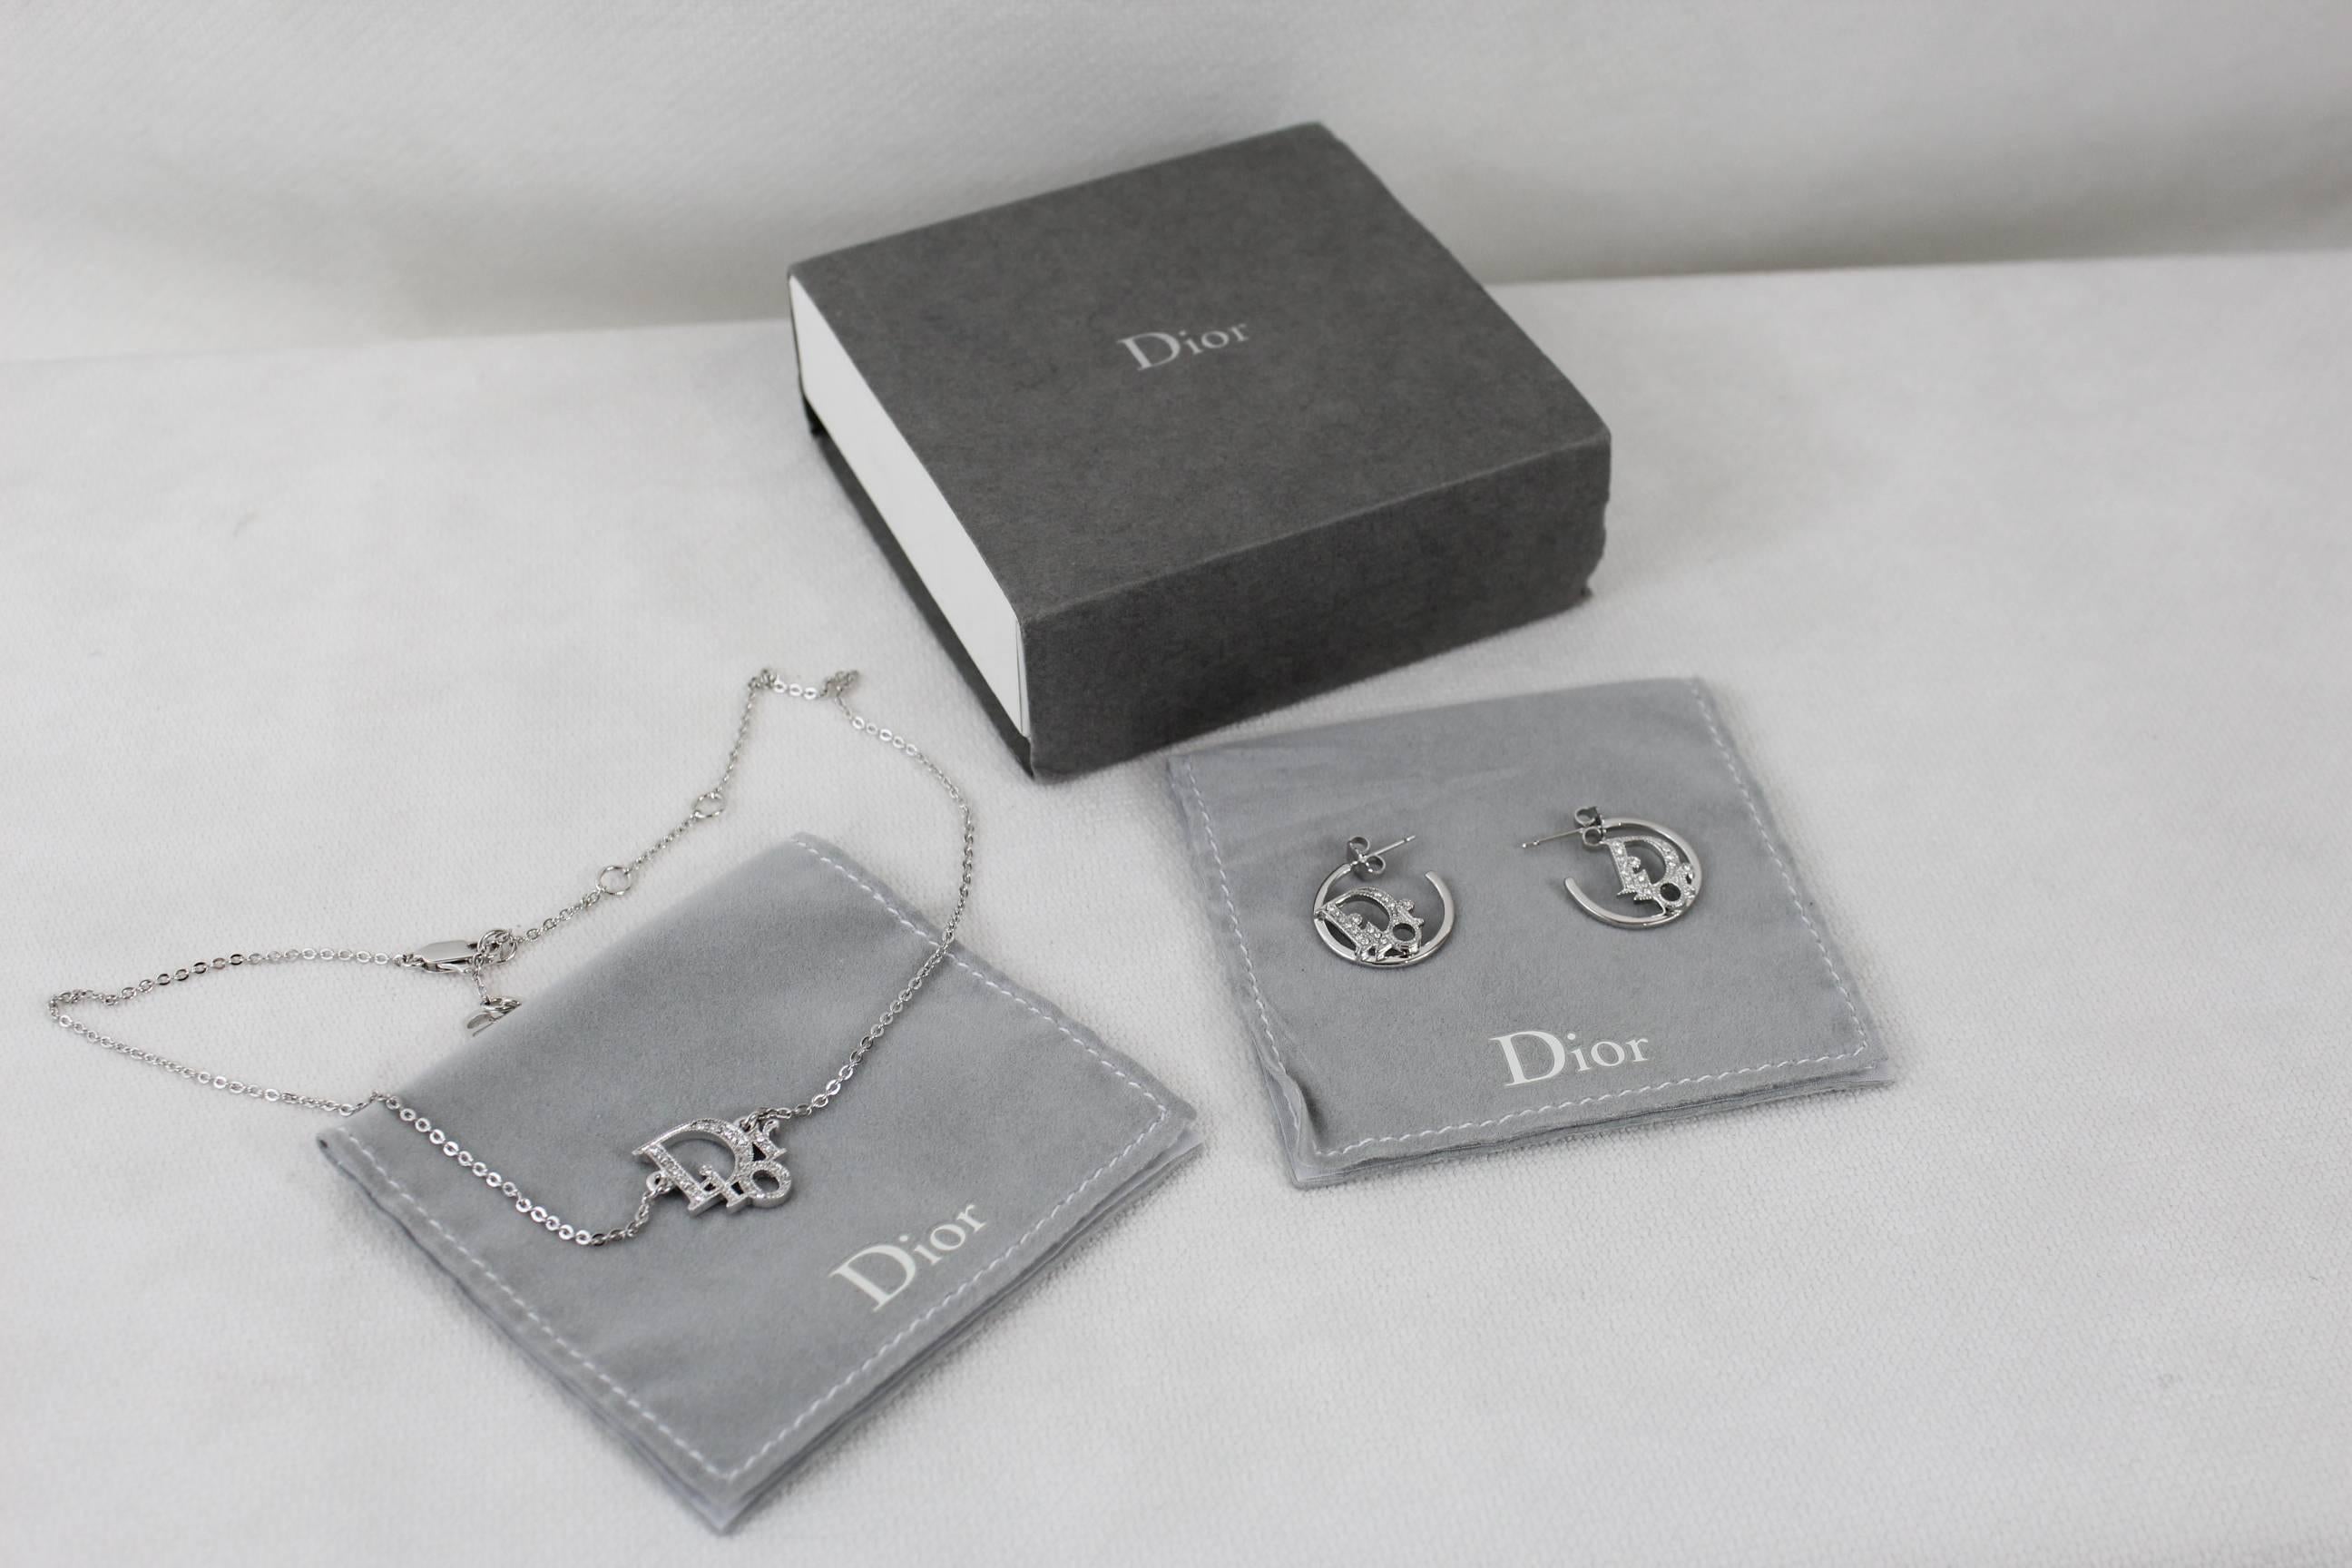 Dior 3 pieces jewlery Set: Necklace and earring 1